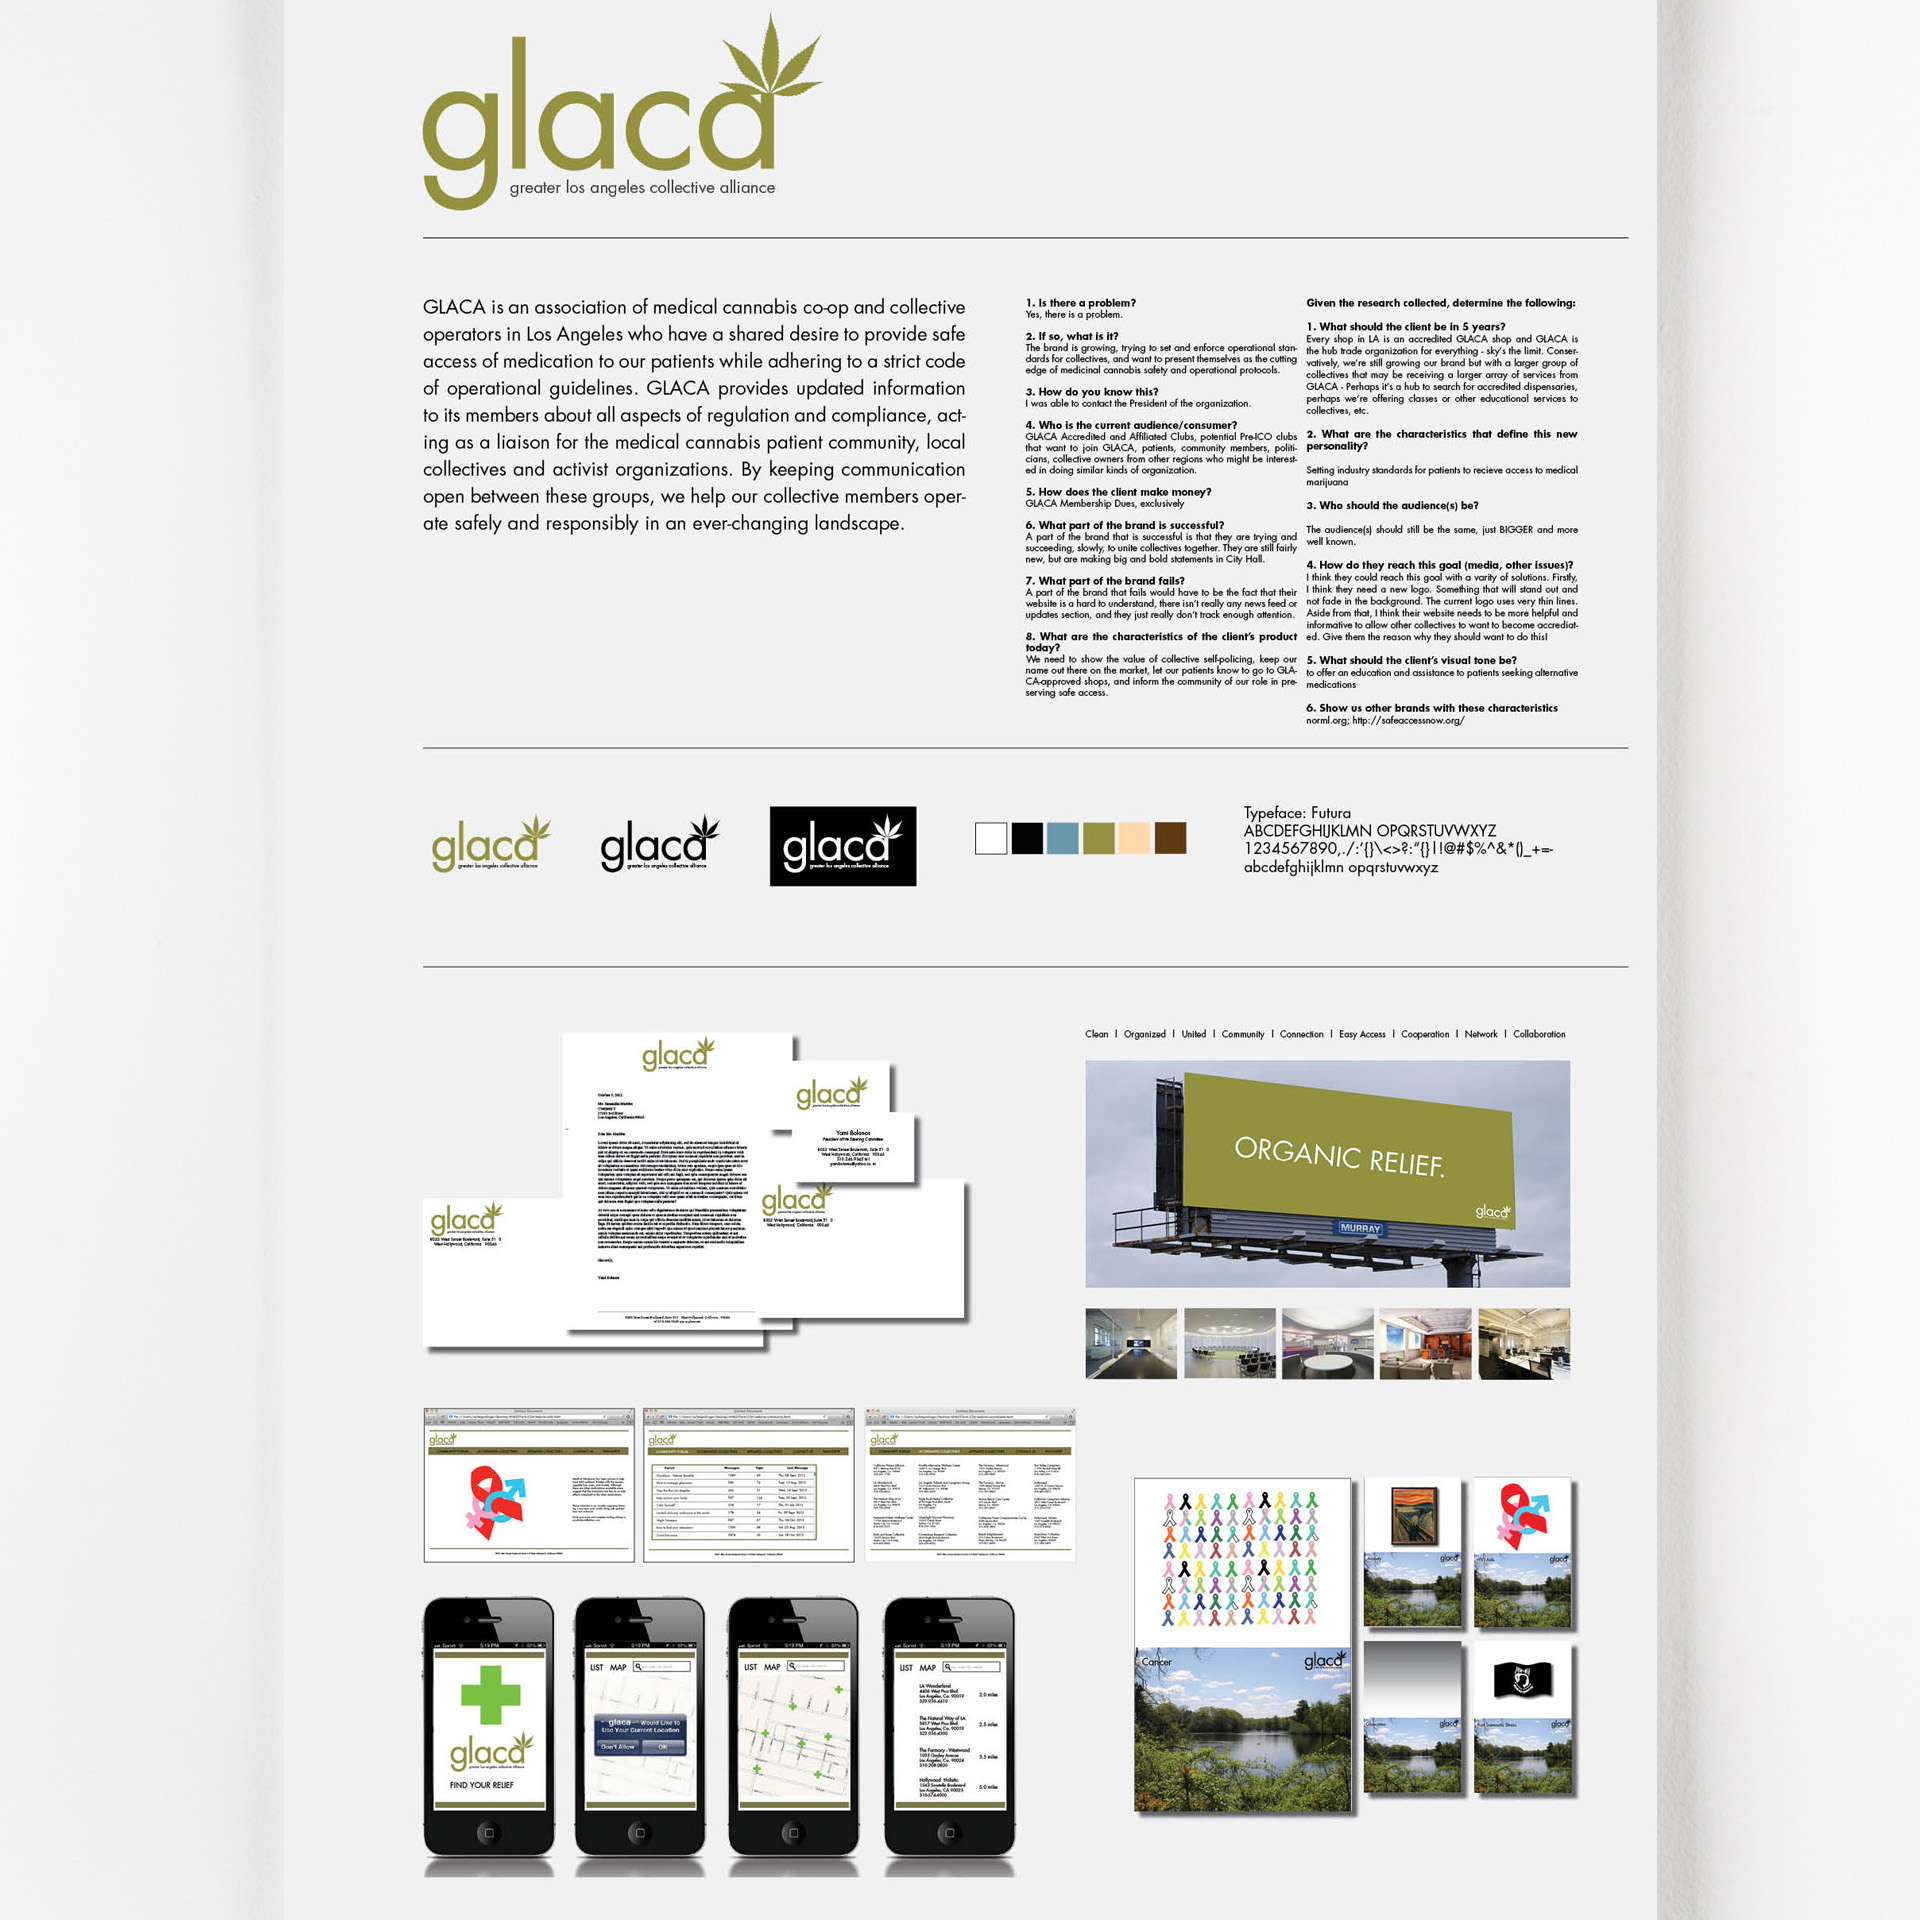 glaca backside_featured image